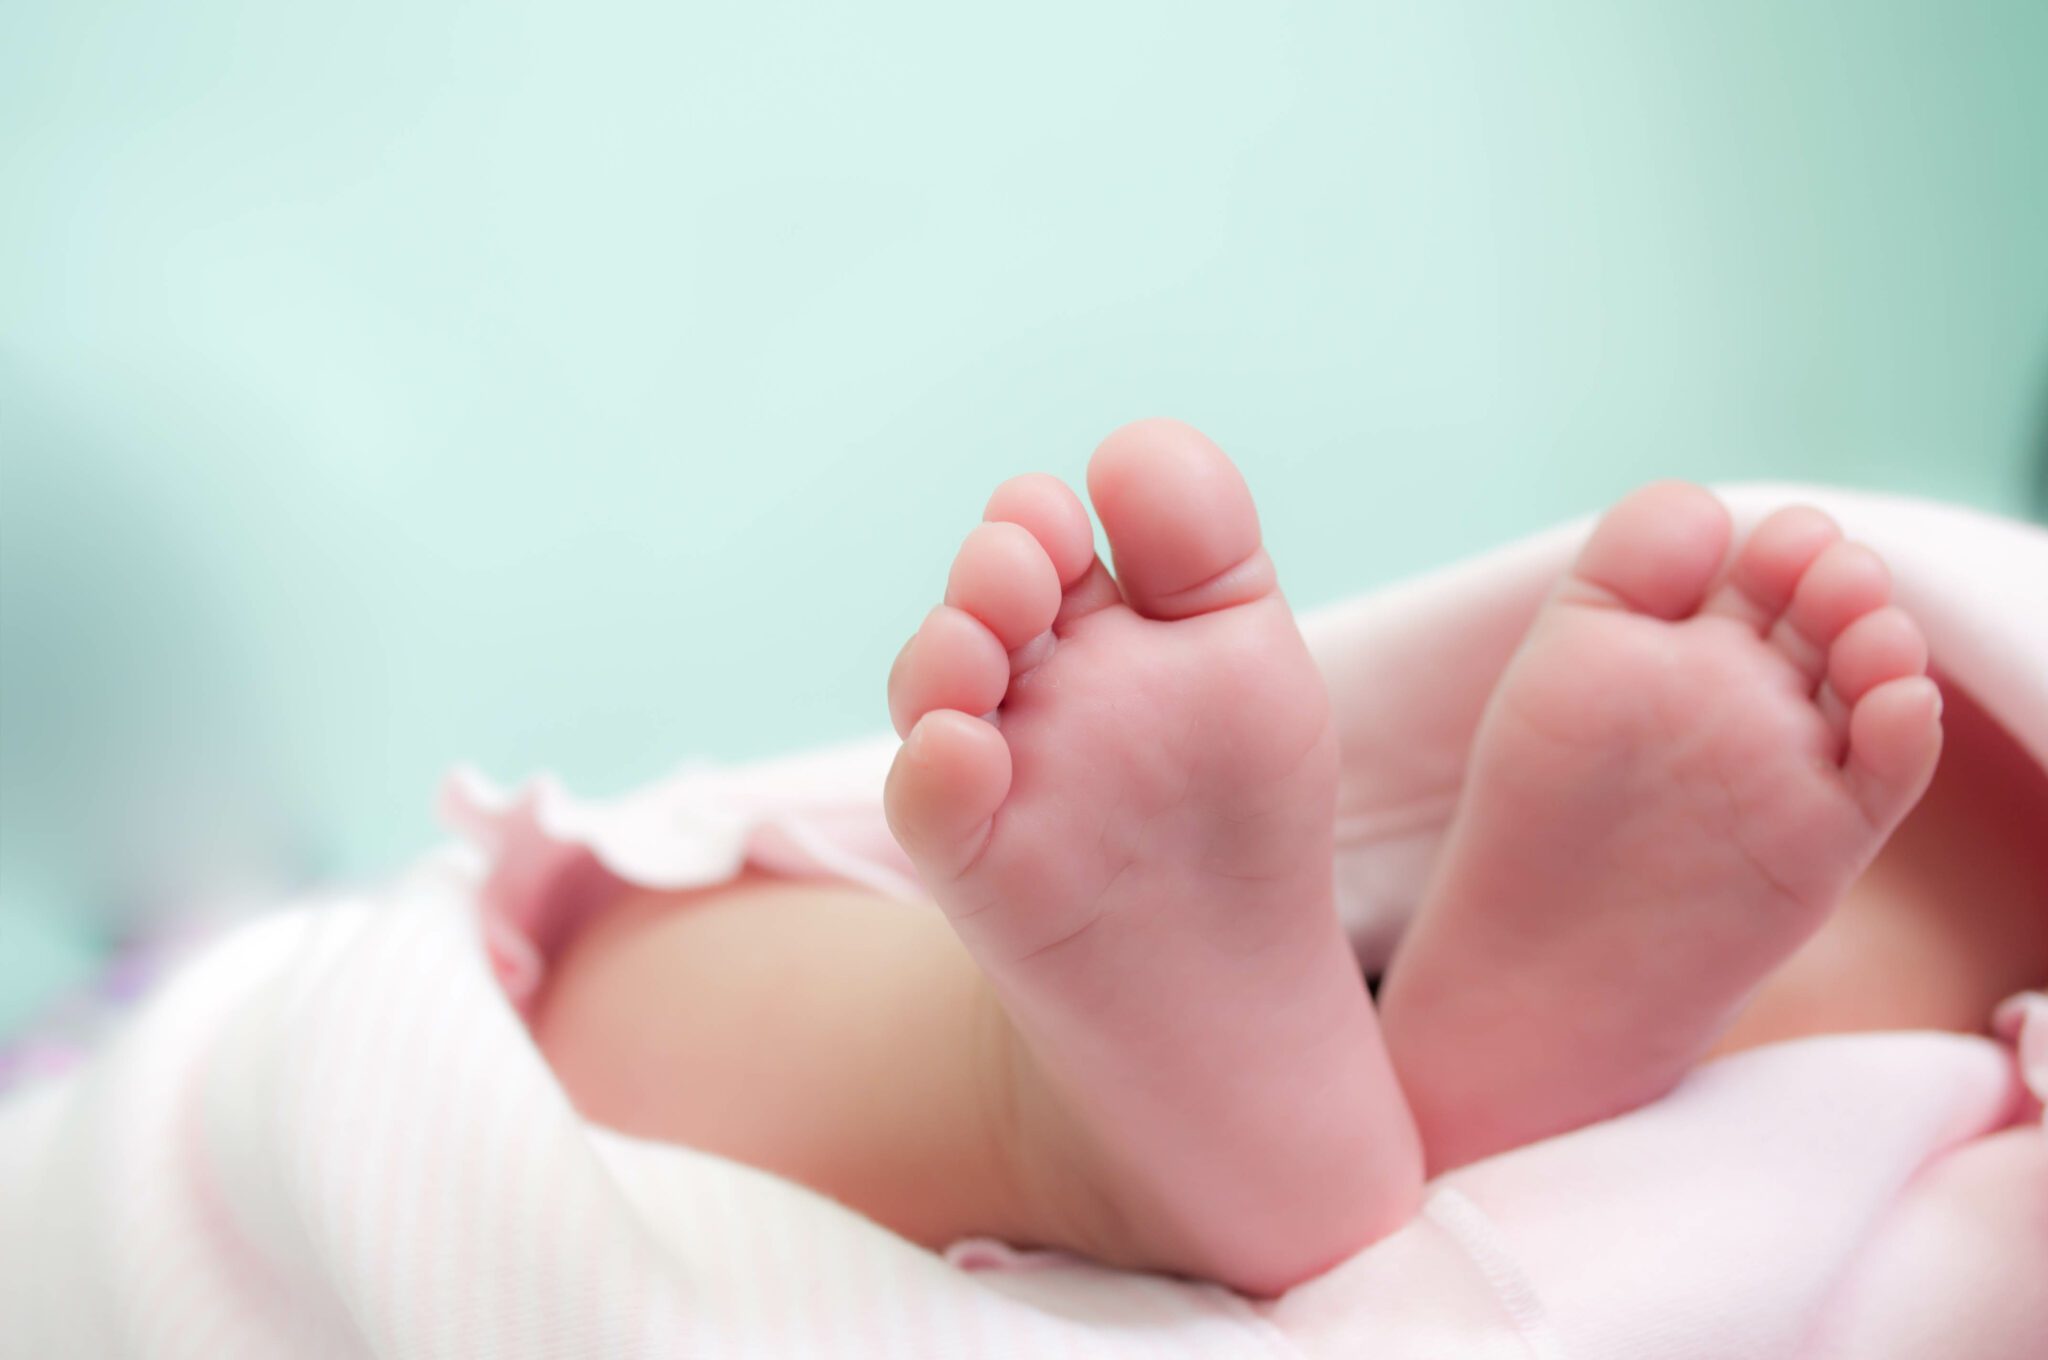 Stock photo showing the soles of a baby's feet laying on a white blanket